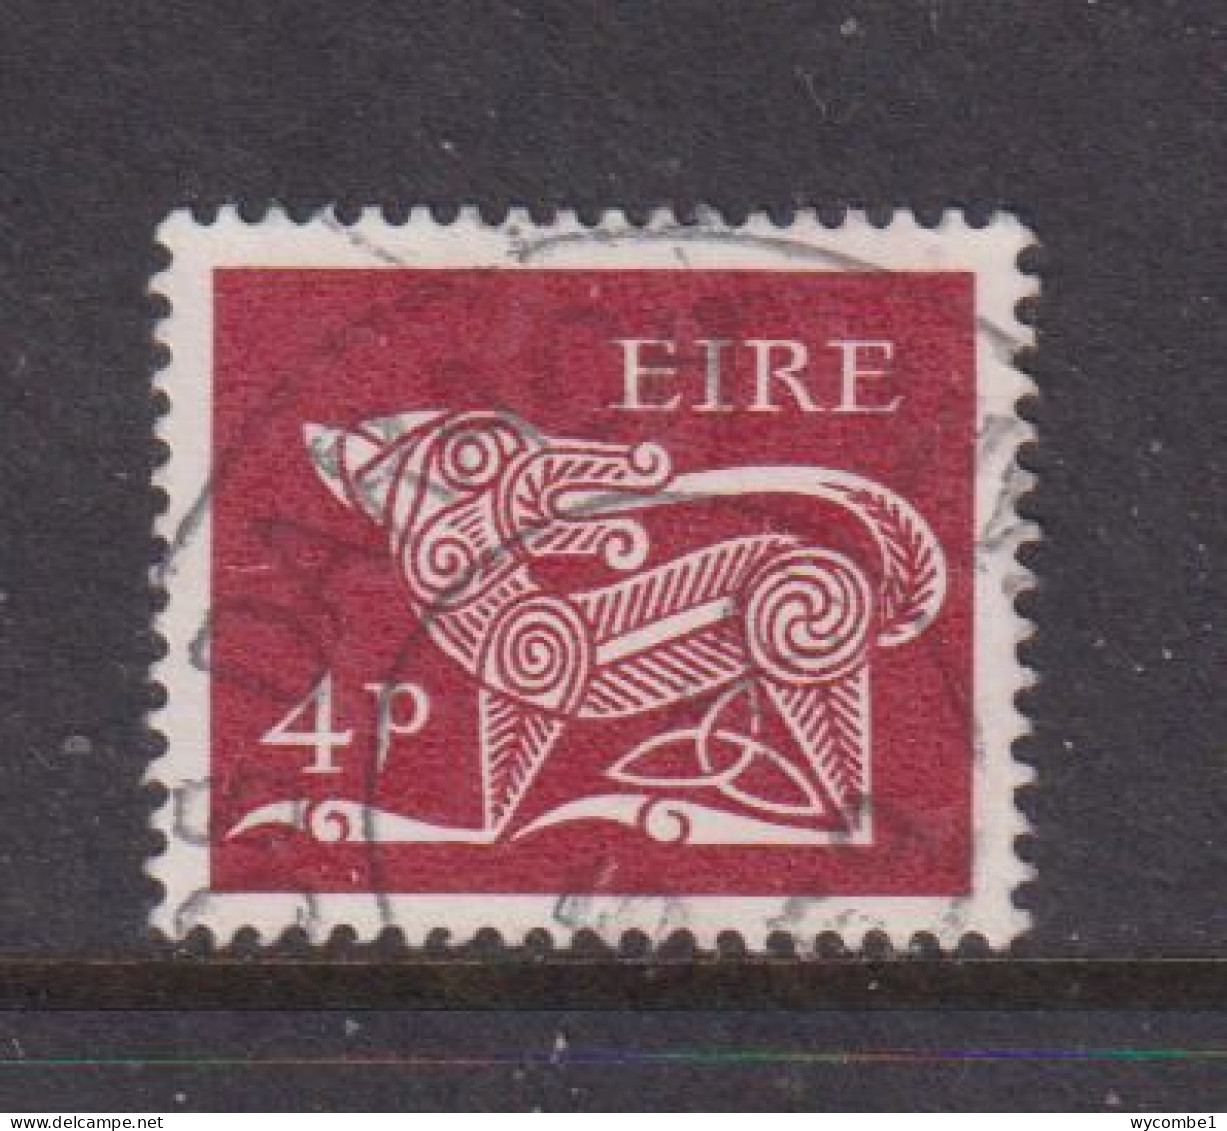 IRELAND - 1968  Definitives  4d  Used As Scan - Usati